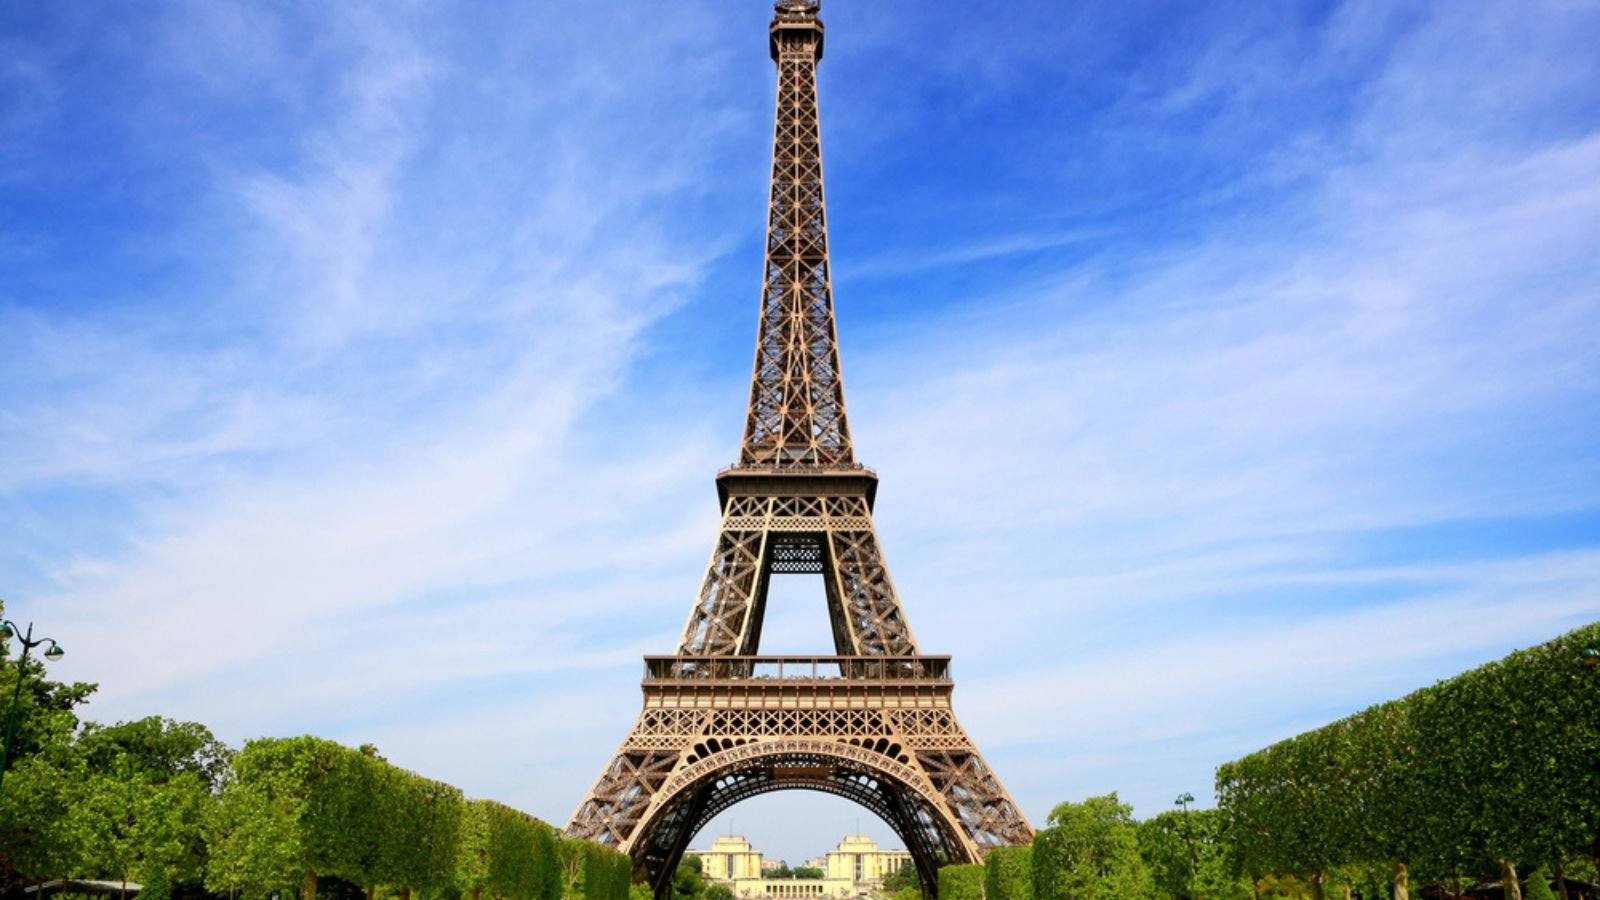 27 Interesting Facts About the Eiffel Tower You Might Not Know